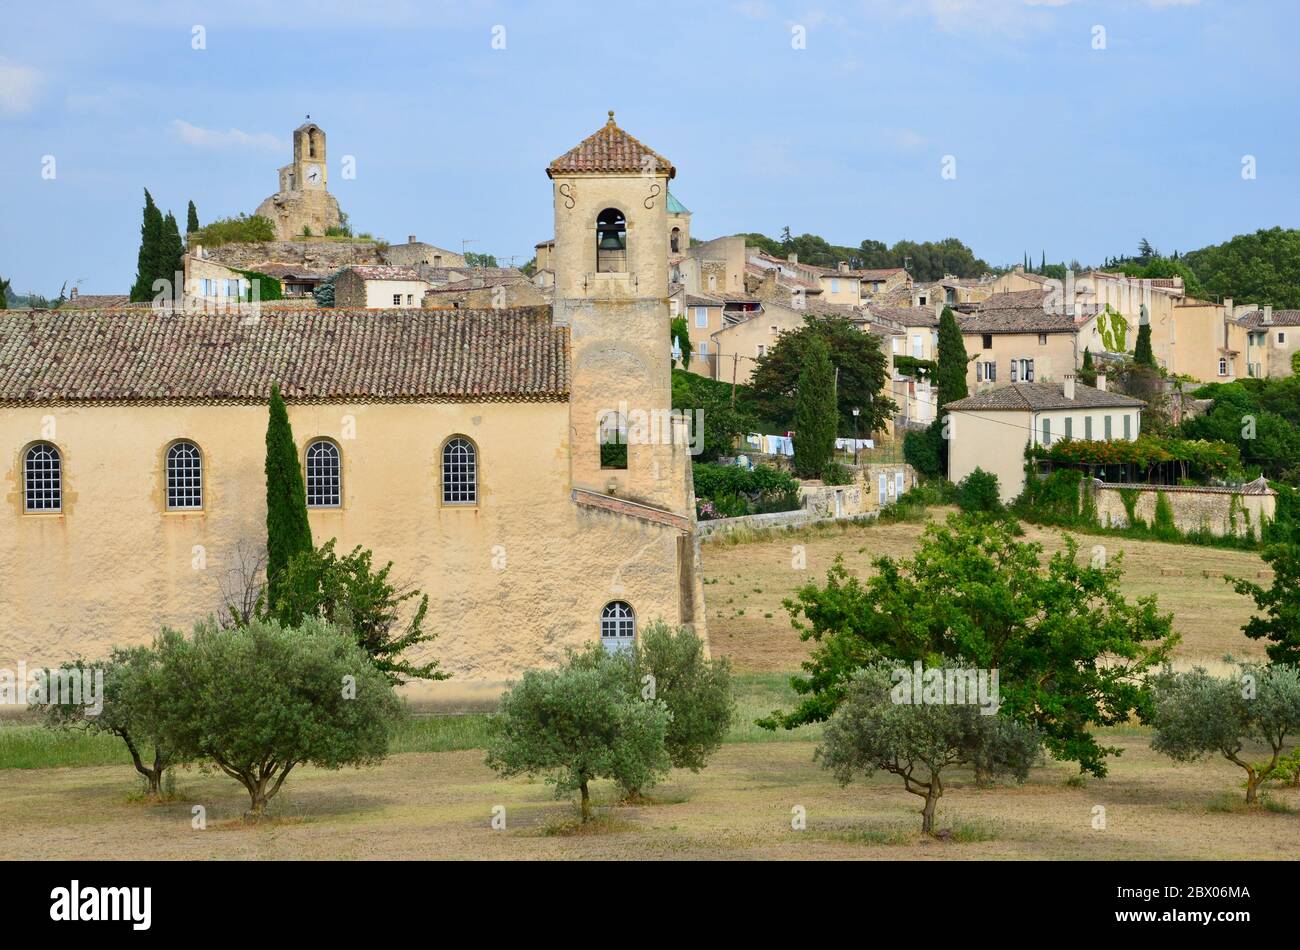 Medieval village Lourmarin on lavender route, district of Vaucluse in Provence in France, classified as one of the most beautiful villages in France Stock Photo